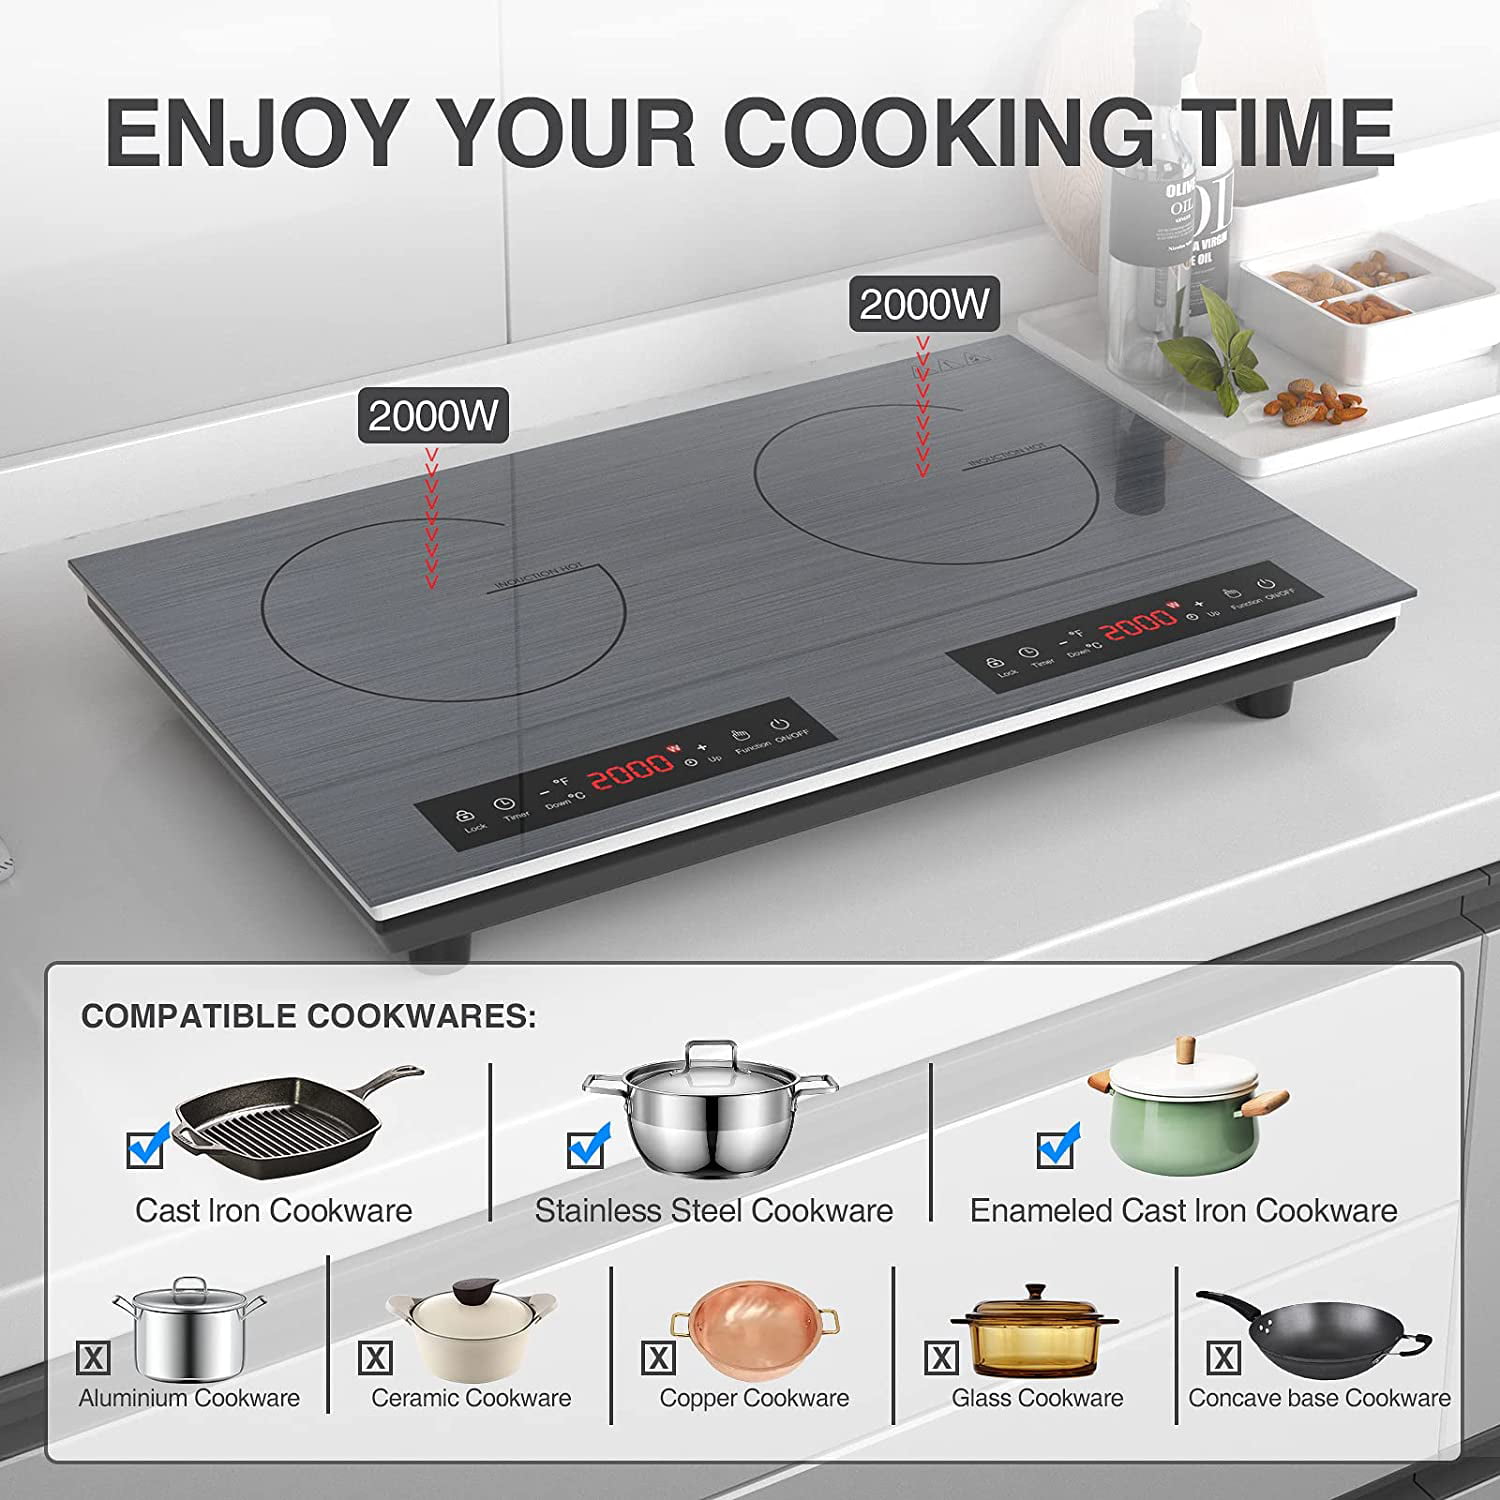 VBGK Electric Cooktop Single Burner 1800W 110v,Electric Stove Top Plug in Electric  Burner Countertop Hot Plate for Cooking,4H & Auto Shutdown Induction Burner,Child  Lock Electric Cooktop 